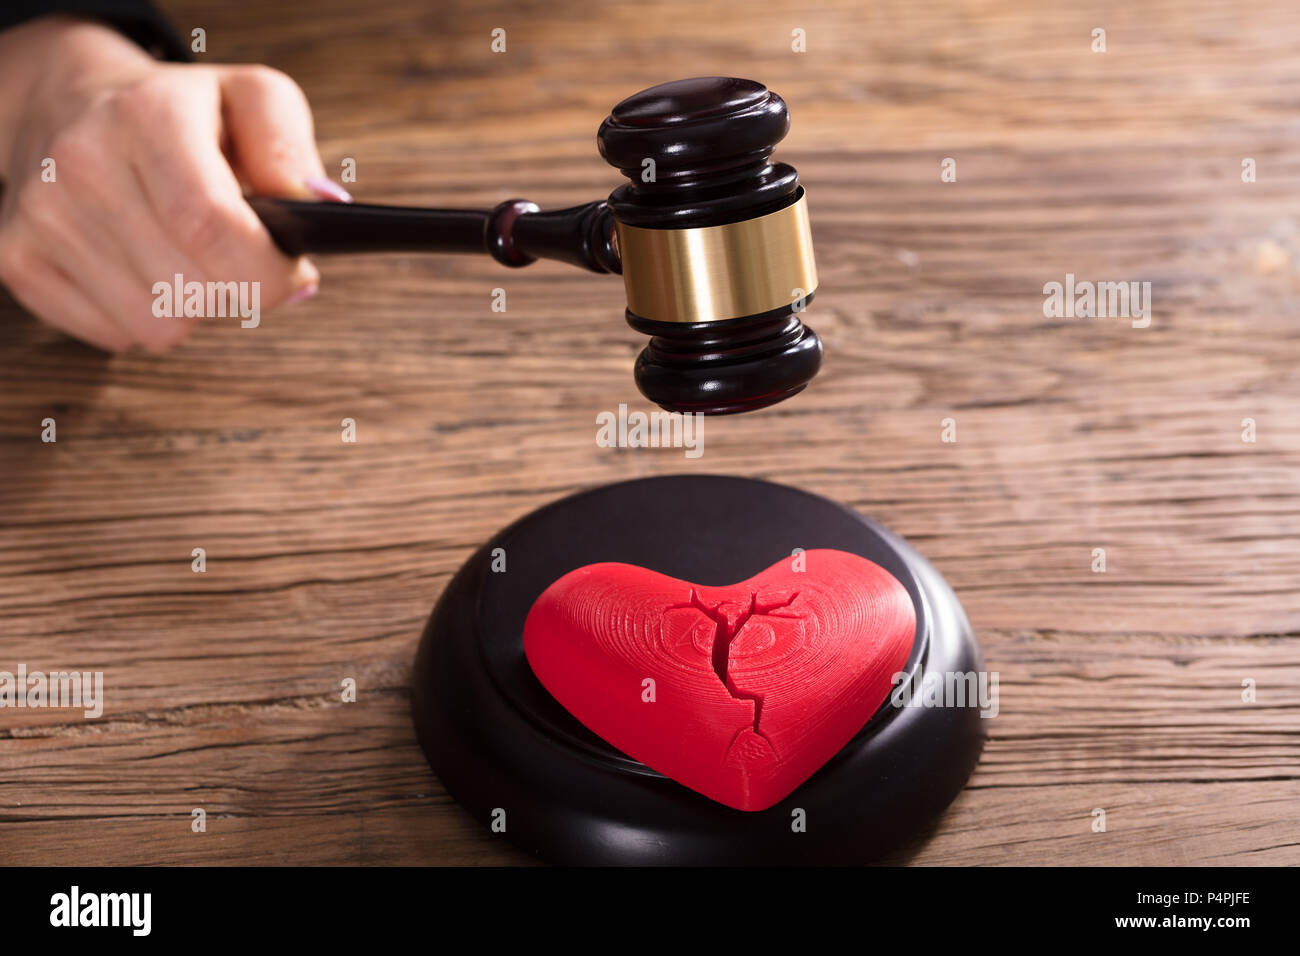 Close-up Of A Broken Red Heart In Front Of Judge Striking Mallet Stock Photo